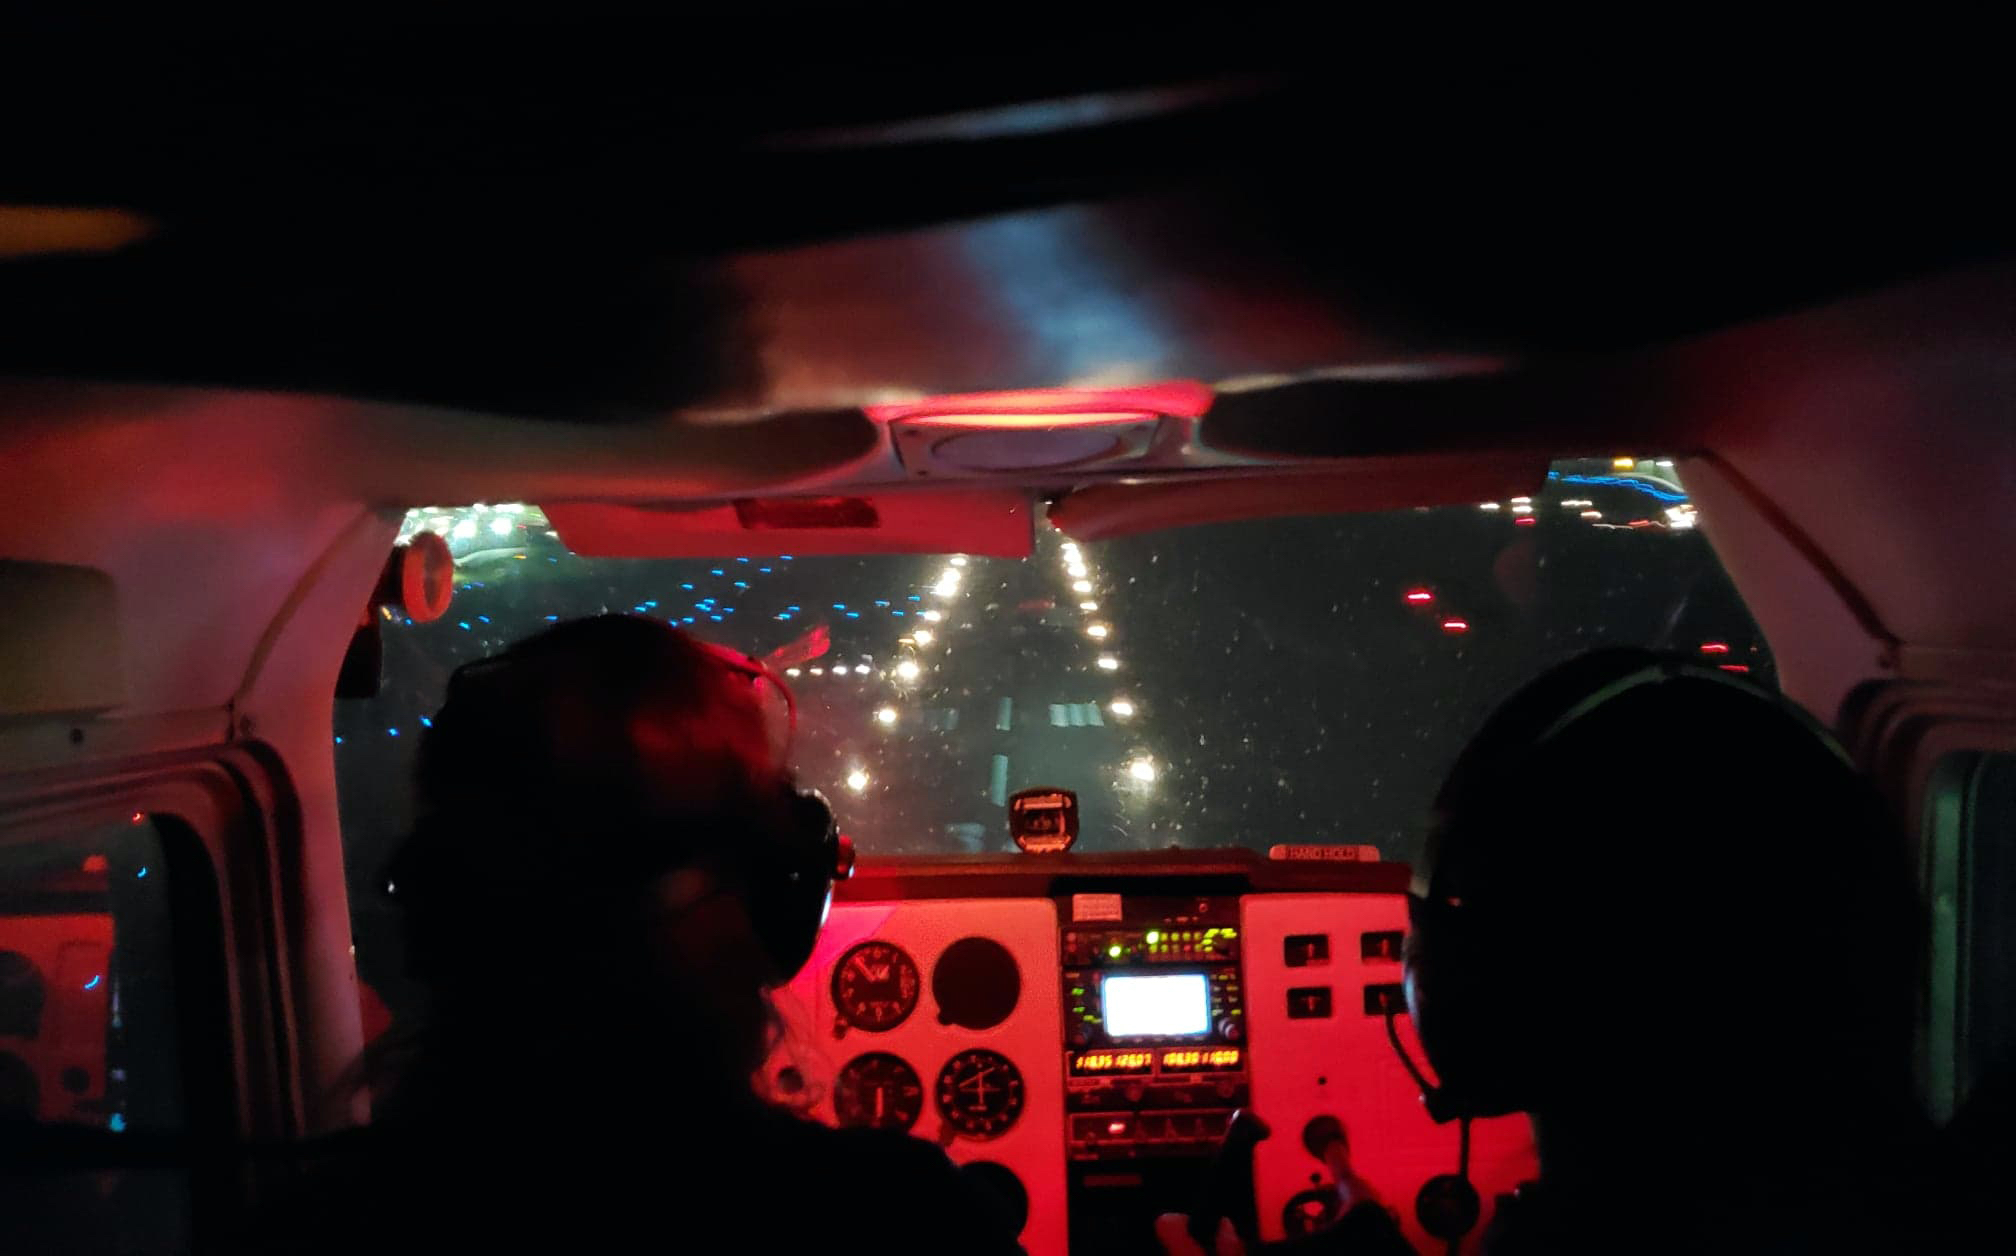 View from the cockpit toward the runway lights showing the instrument panel